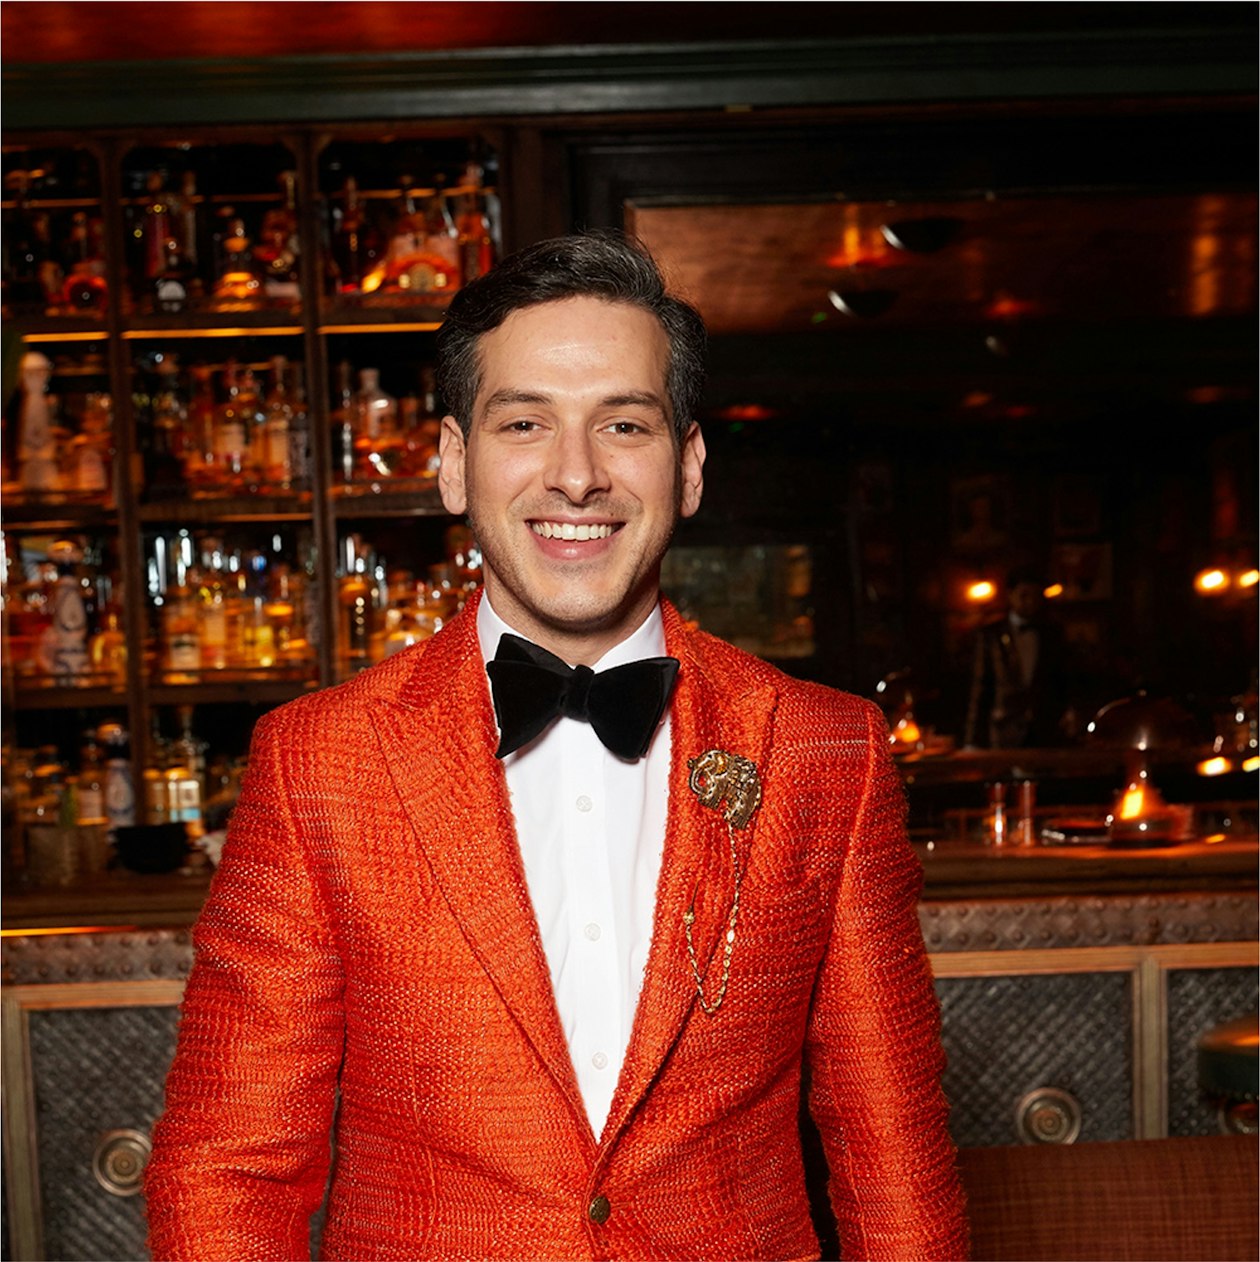 A member of The Mexican hospitality team, Annabel's, Mayfair, Private Club